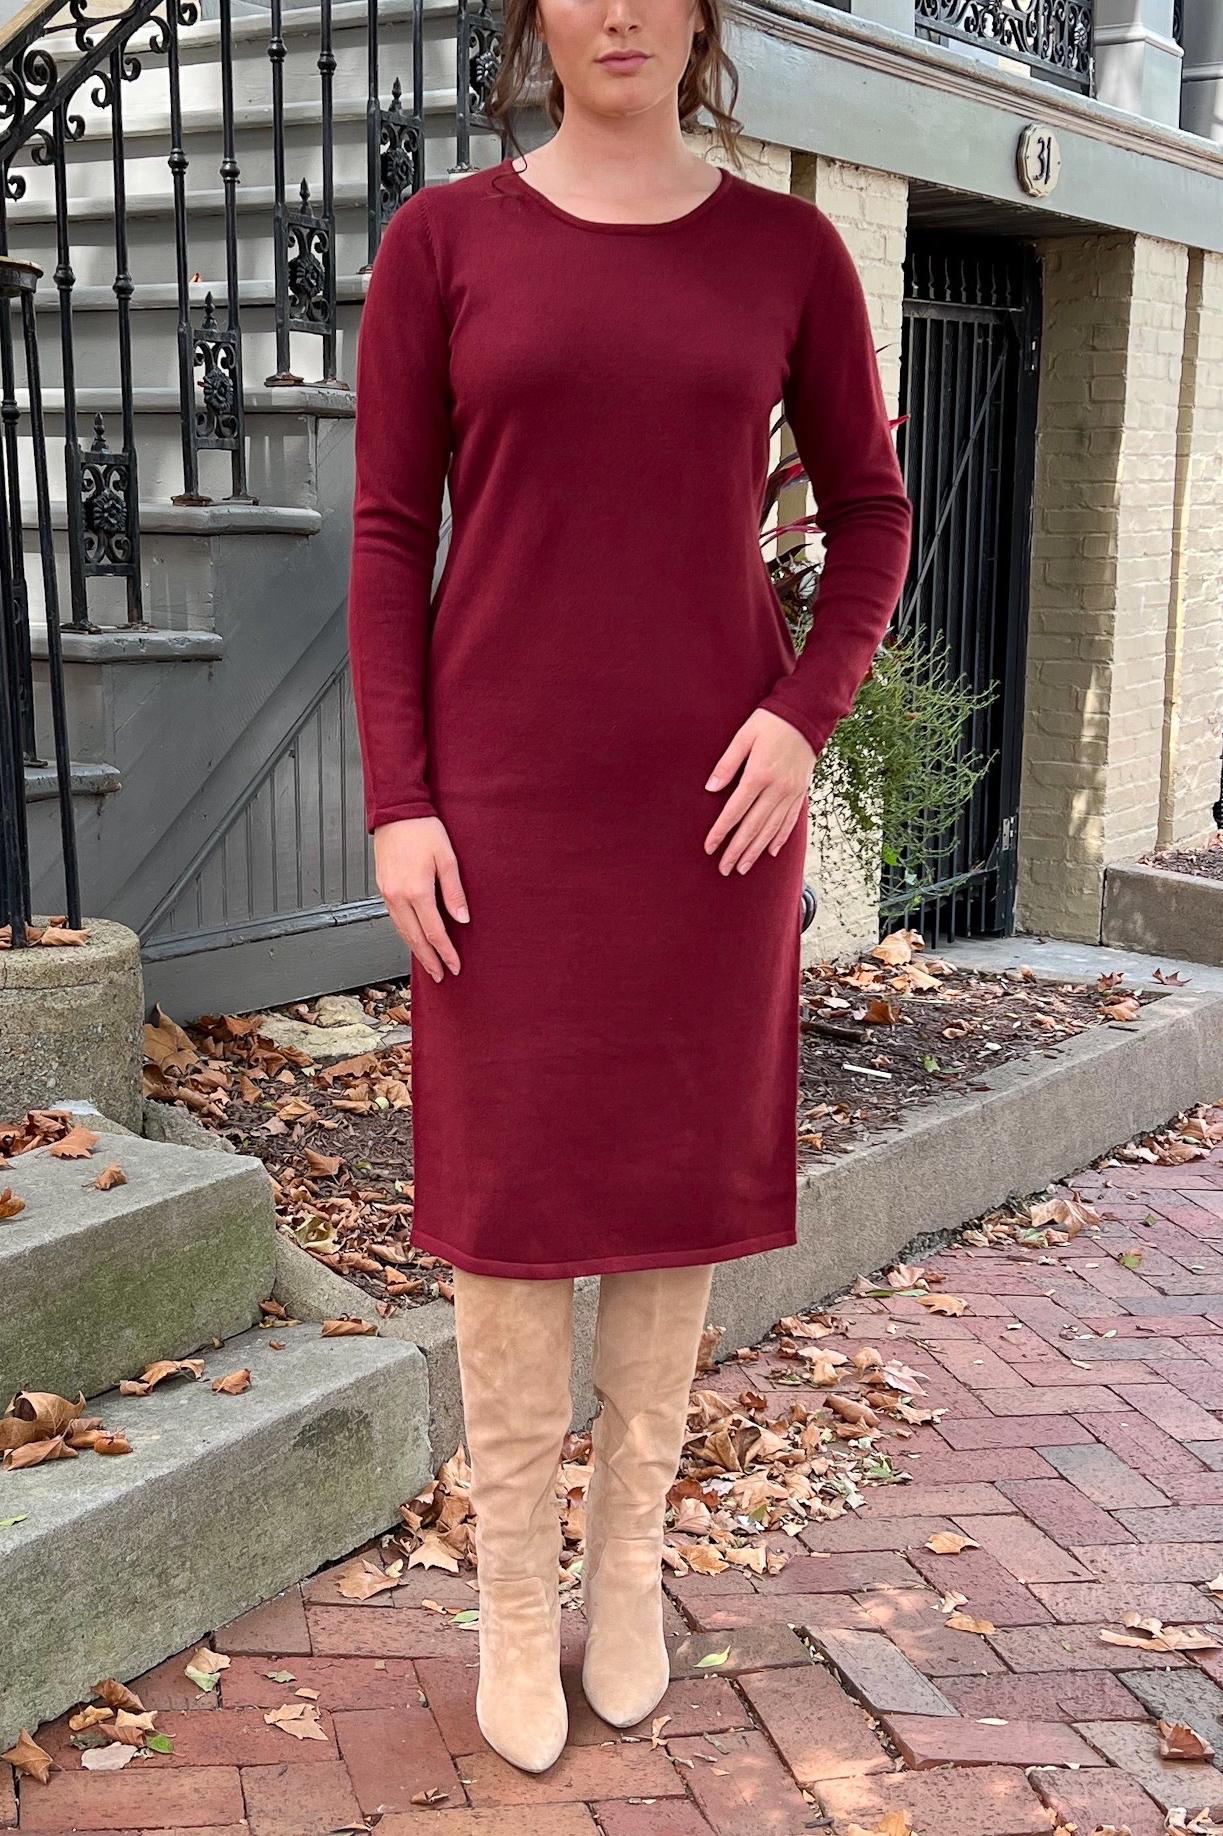 THE QUINN EVERYDAY SCOOP NECK SWEATER DRESS IN BURGUNDY